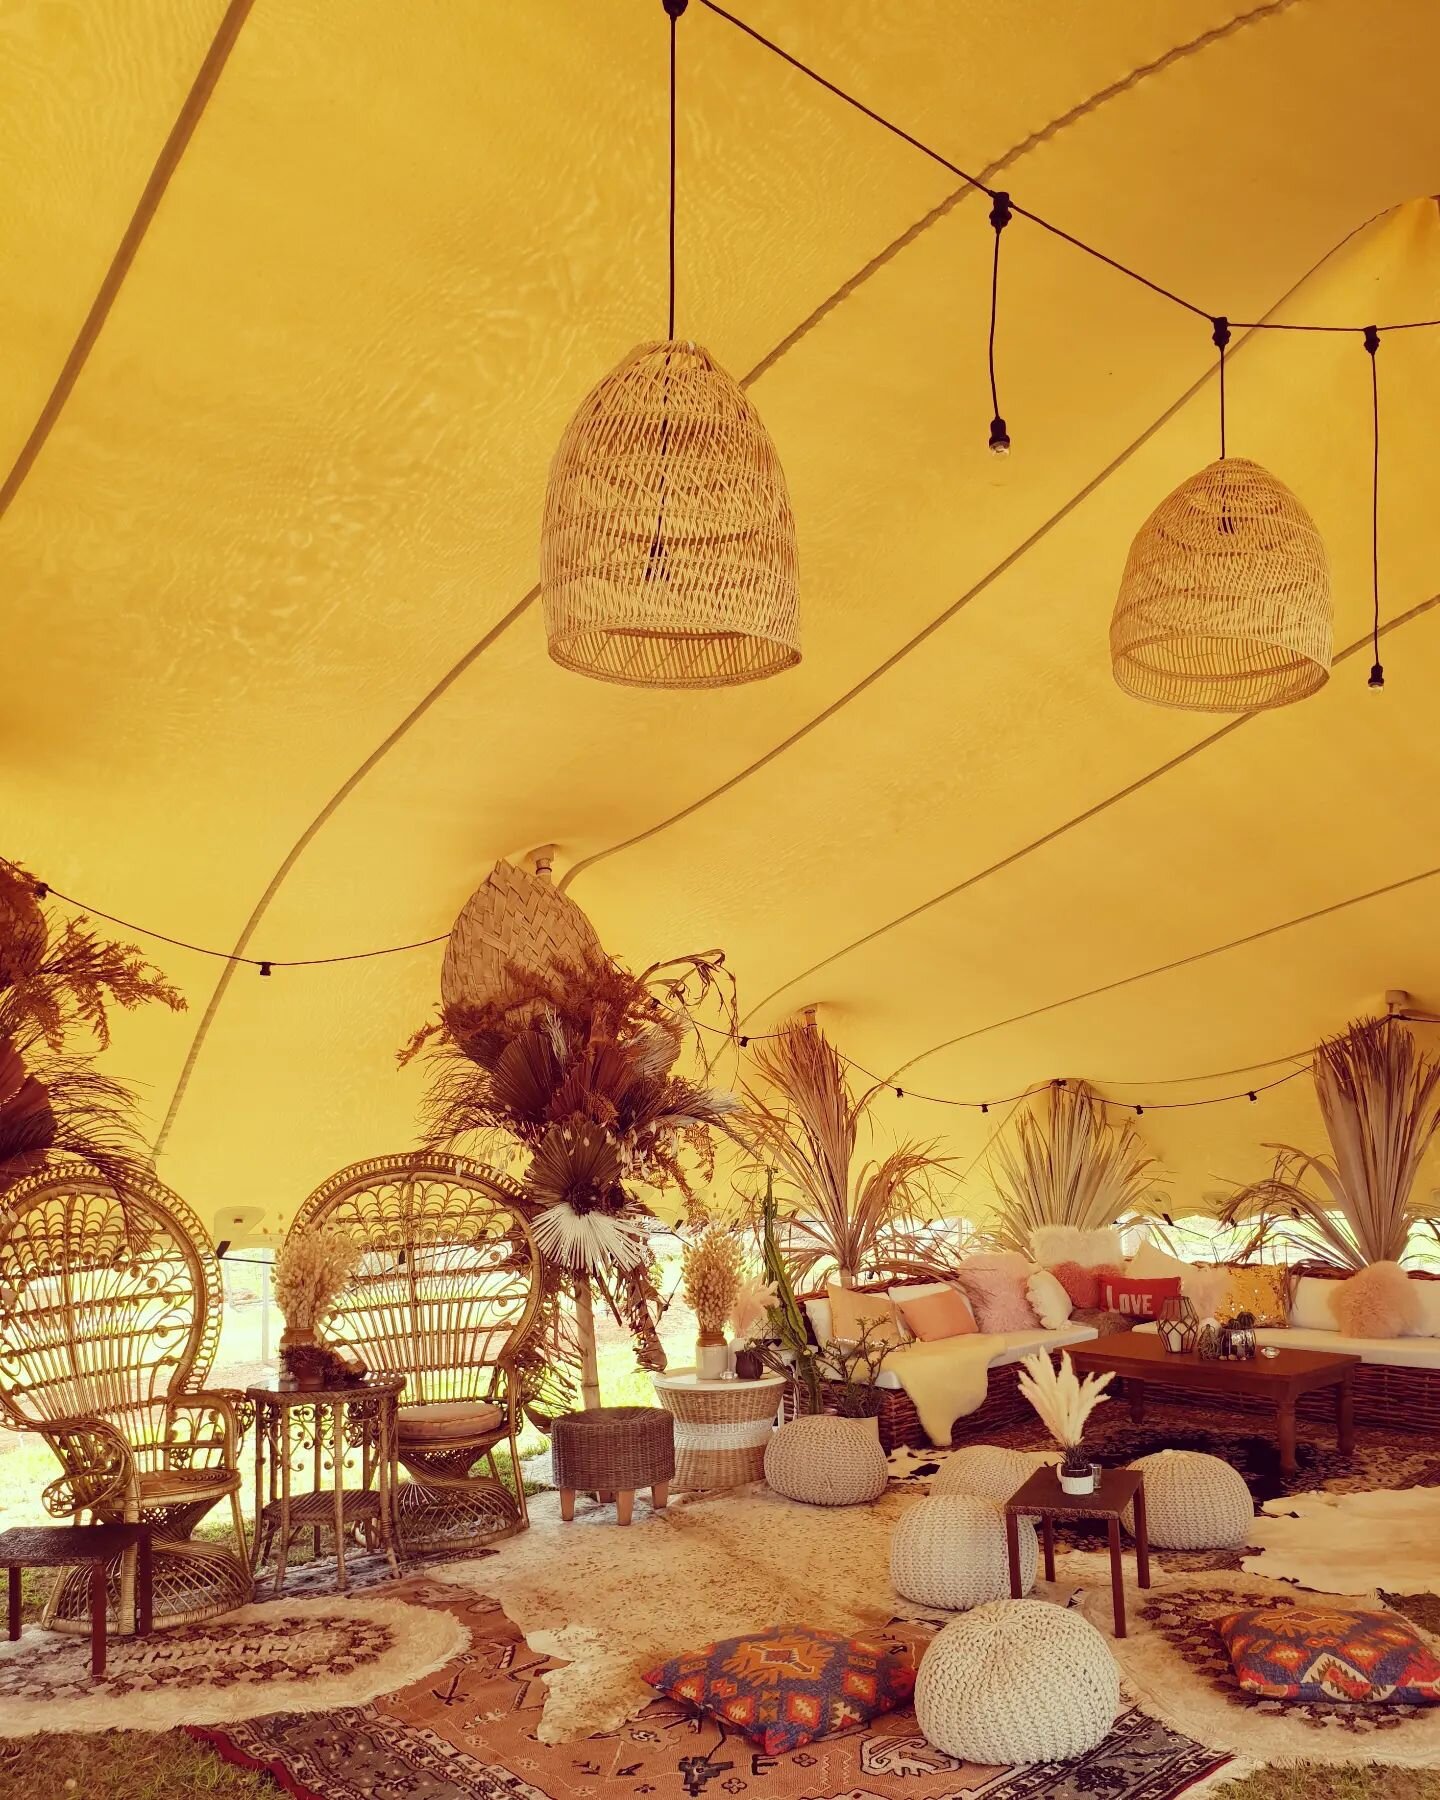 It was ultimate boho vibes for this delightful farm wedding 🤎

#stretchtents #stretchtentwedding #stretchtentweddings
#tentickle #wastretchtent #marquee #perthmarquee #perthtents #perthtent #perthtenthire